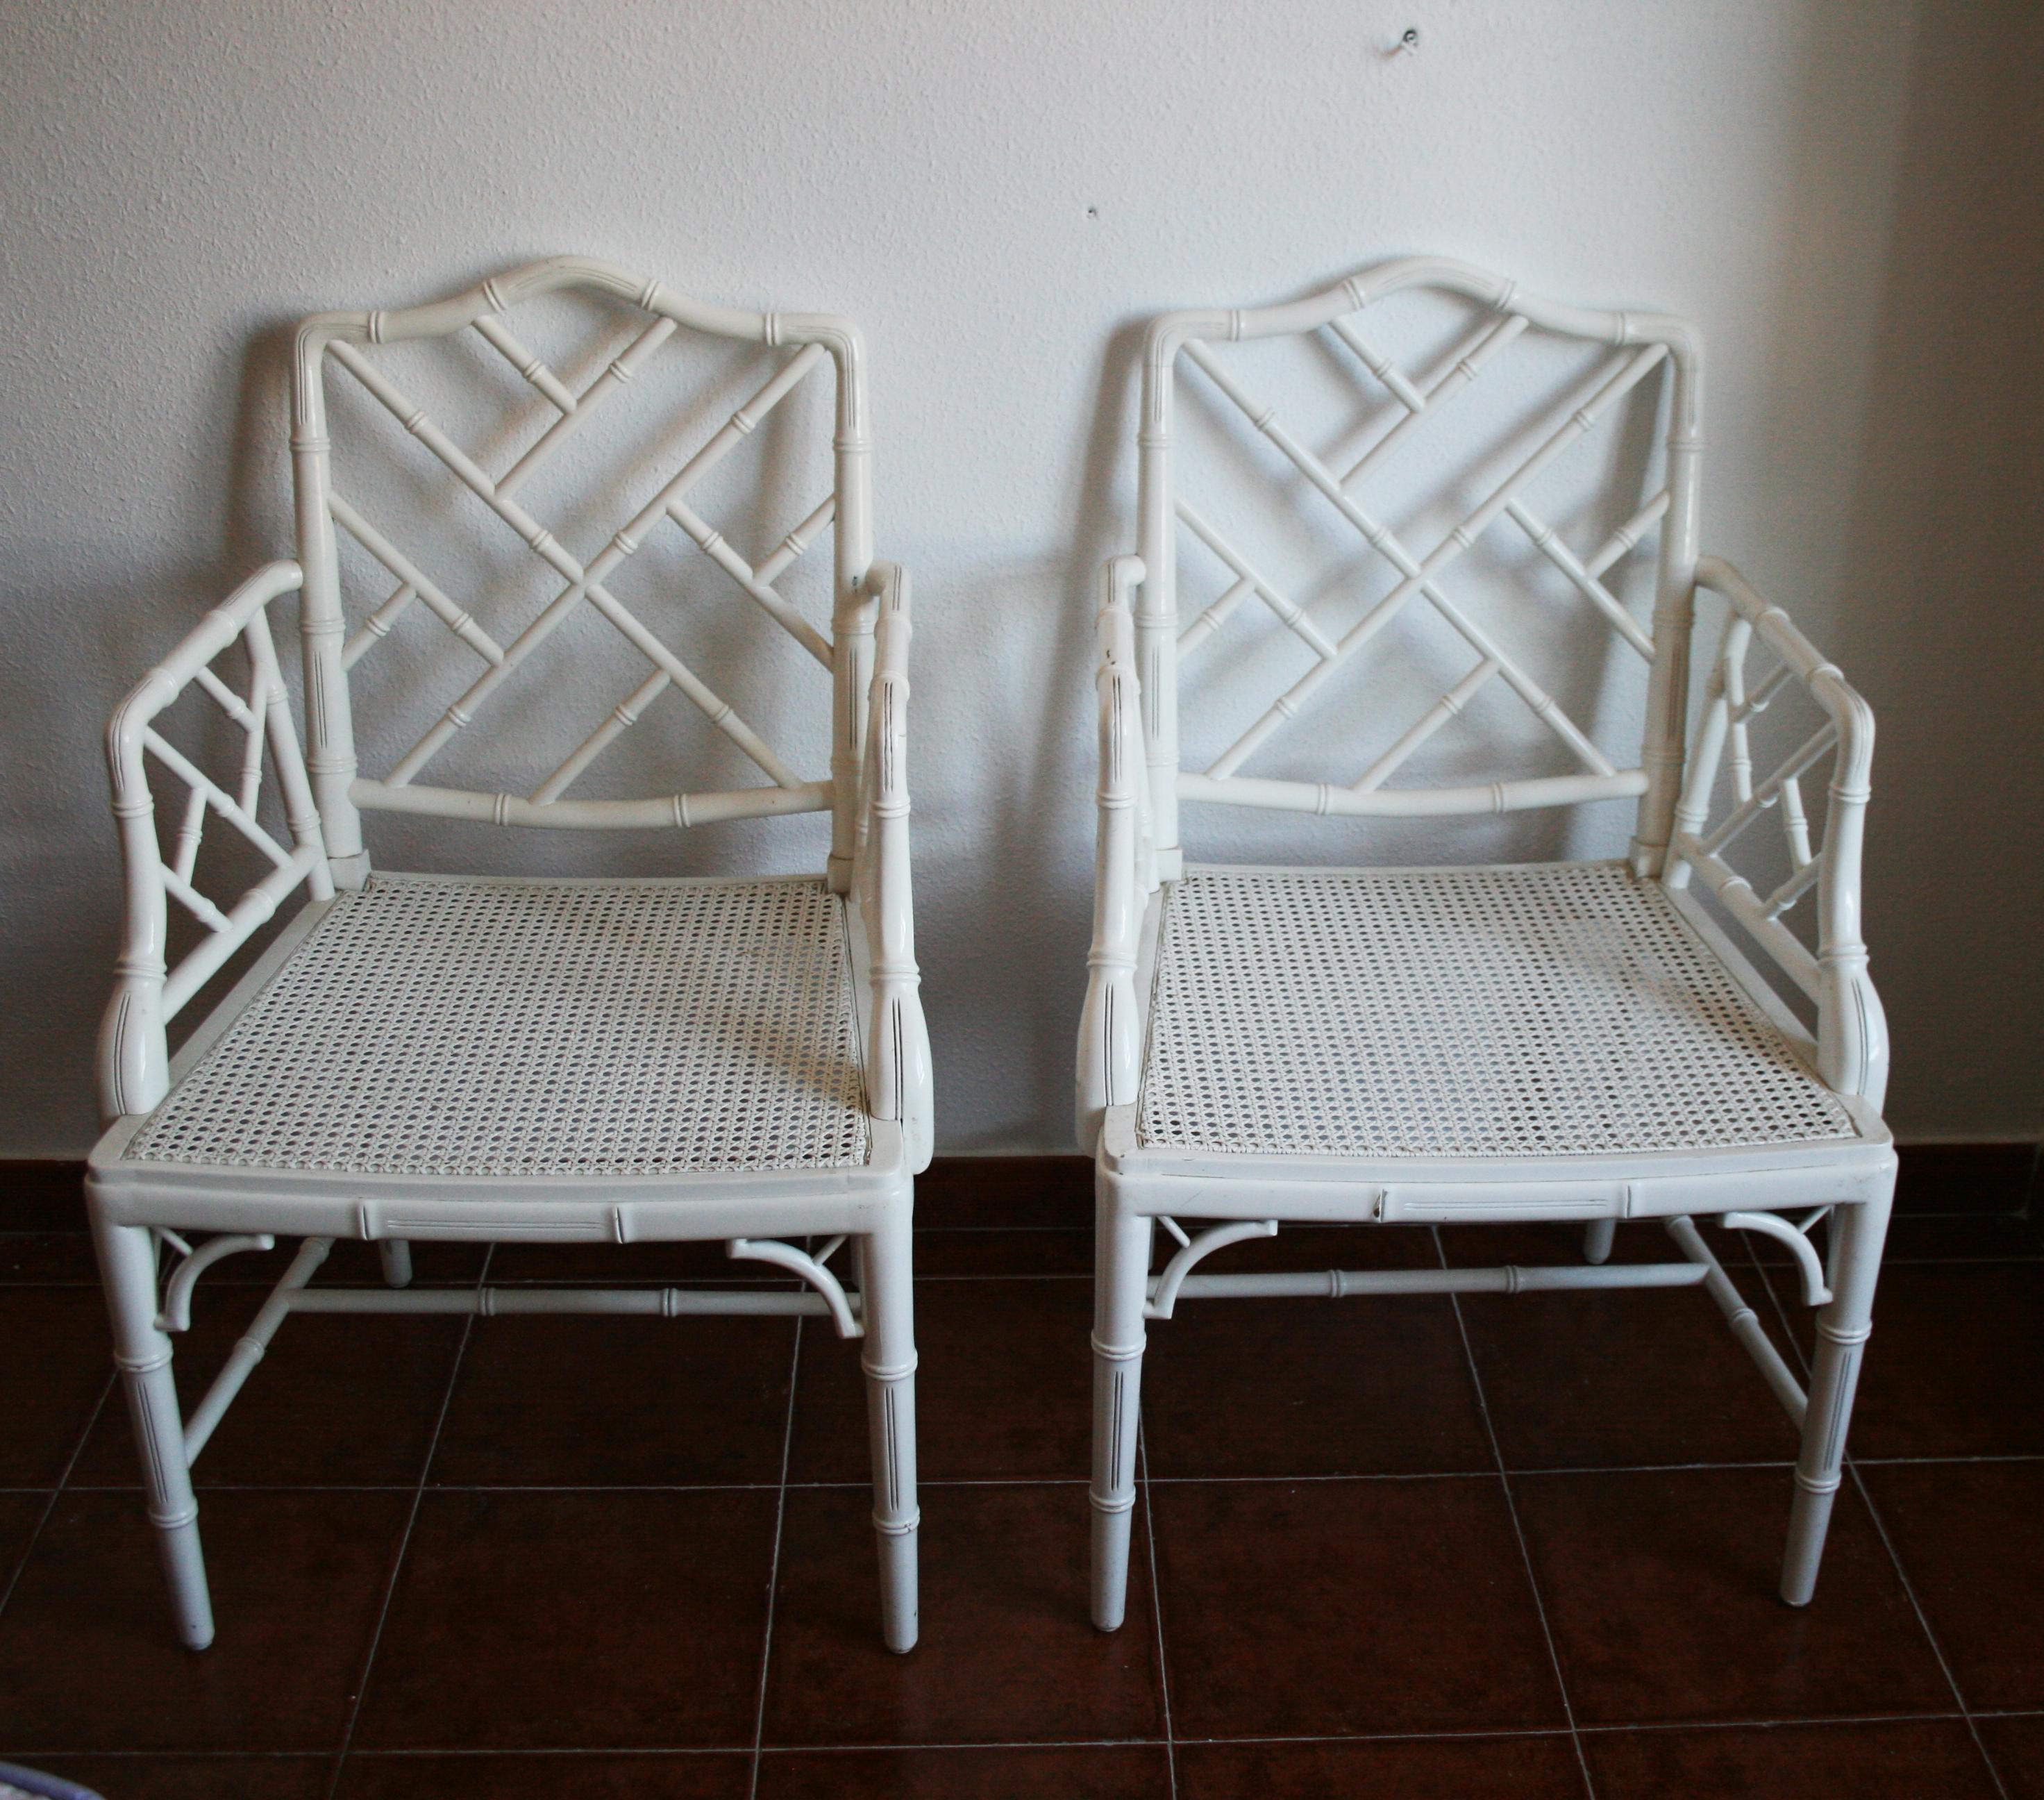 Midcentury Chinese Chippendale Faux Bamboo white Cane Chair


Midcetury wood dining chair or armchair in faux bamboo whit a white lacquered finish. 

Made in the Chinese Chippendale style with an open fretwork design on the back and sides in